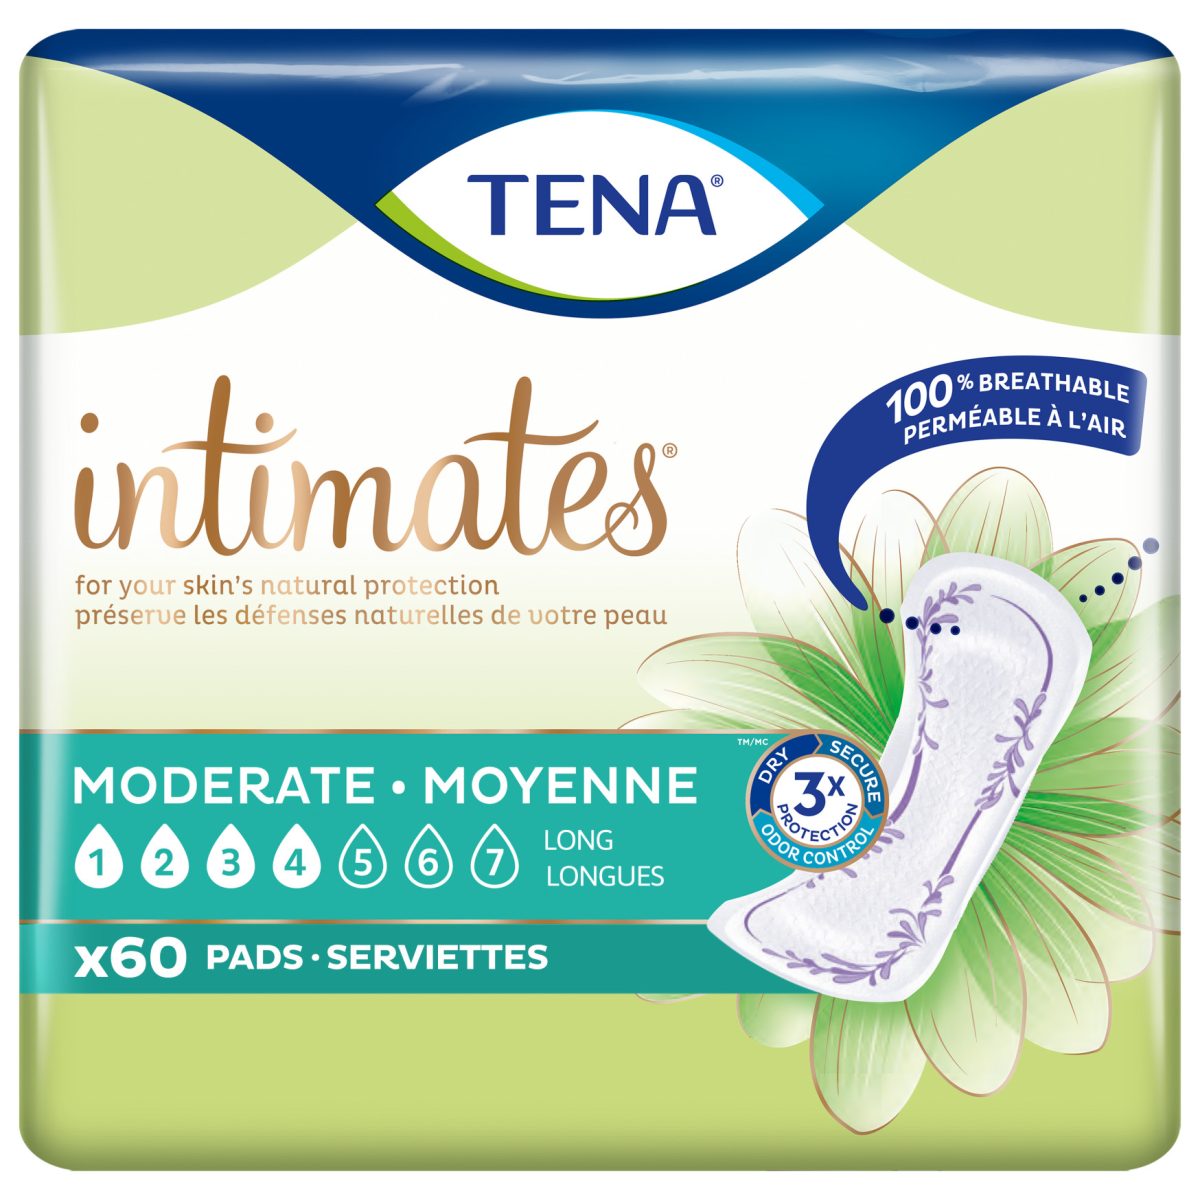 TENA Intimates Pads Moderate Long | 12" | White | 54375 | 3 Bags of 60